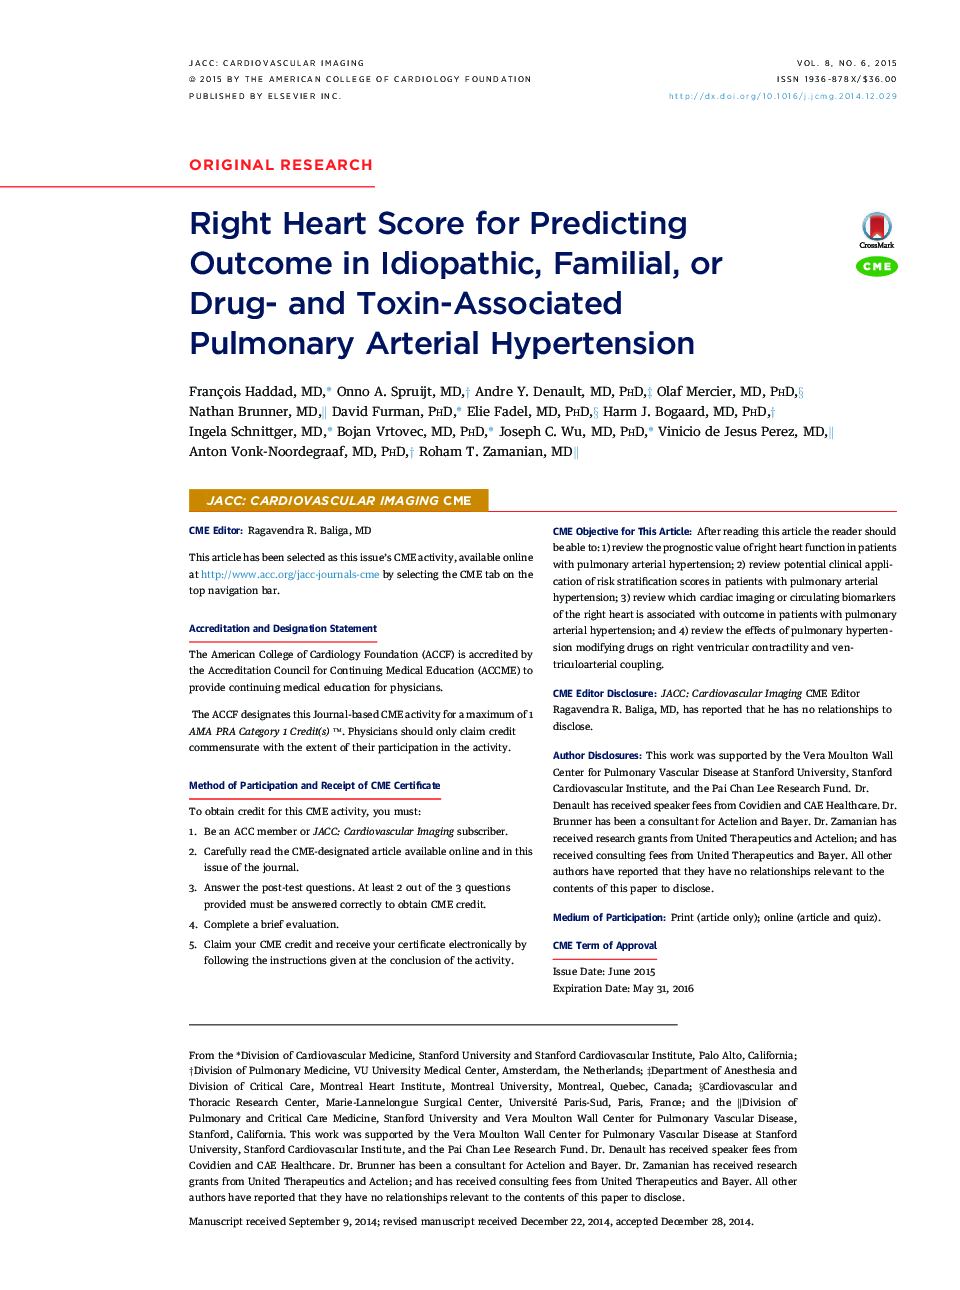 Right Heart Score for Predicting Outcome in Idiopathic, Familial, or Drug- and Toxin-Associated Pulmonary Arterial Hypertension 